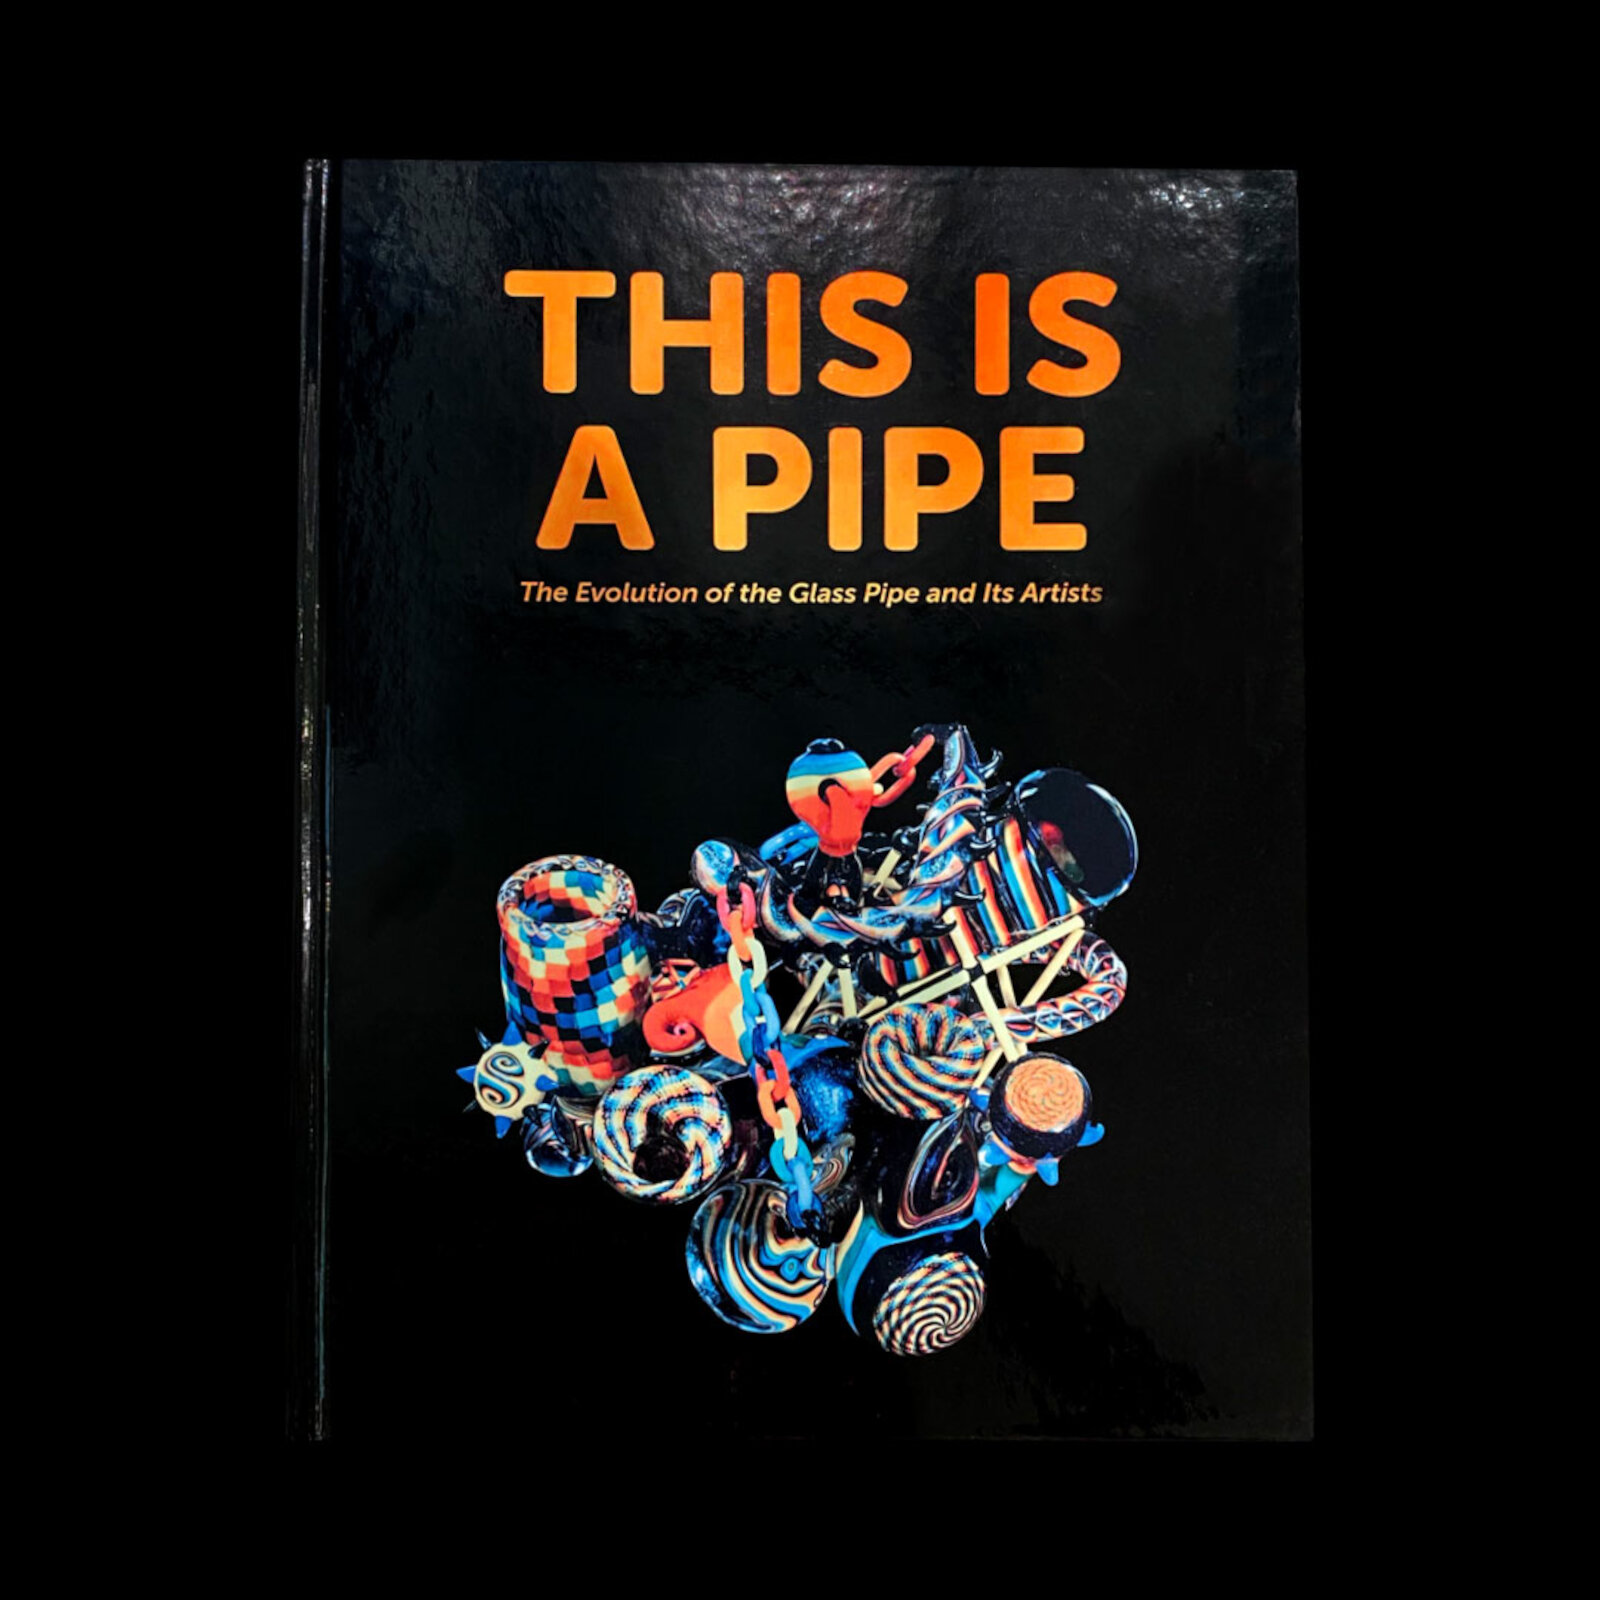 This is a Pipe - The Evolution of the Glass Pipe and its Artists